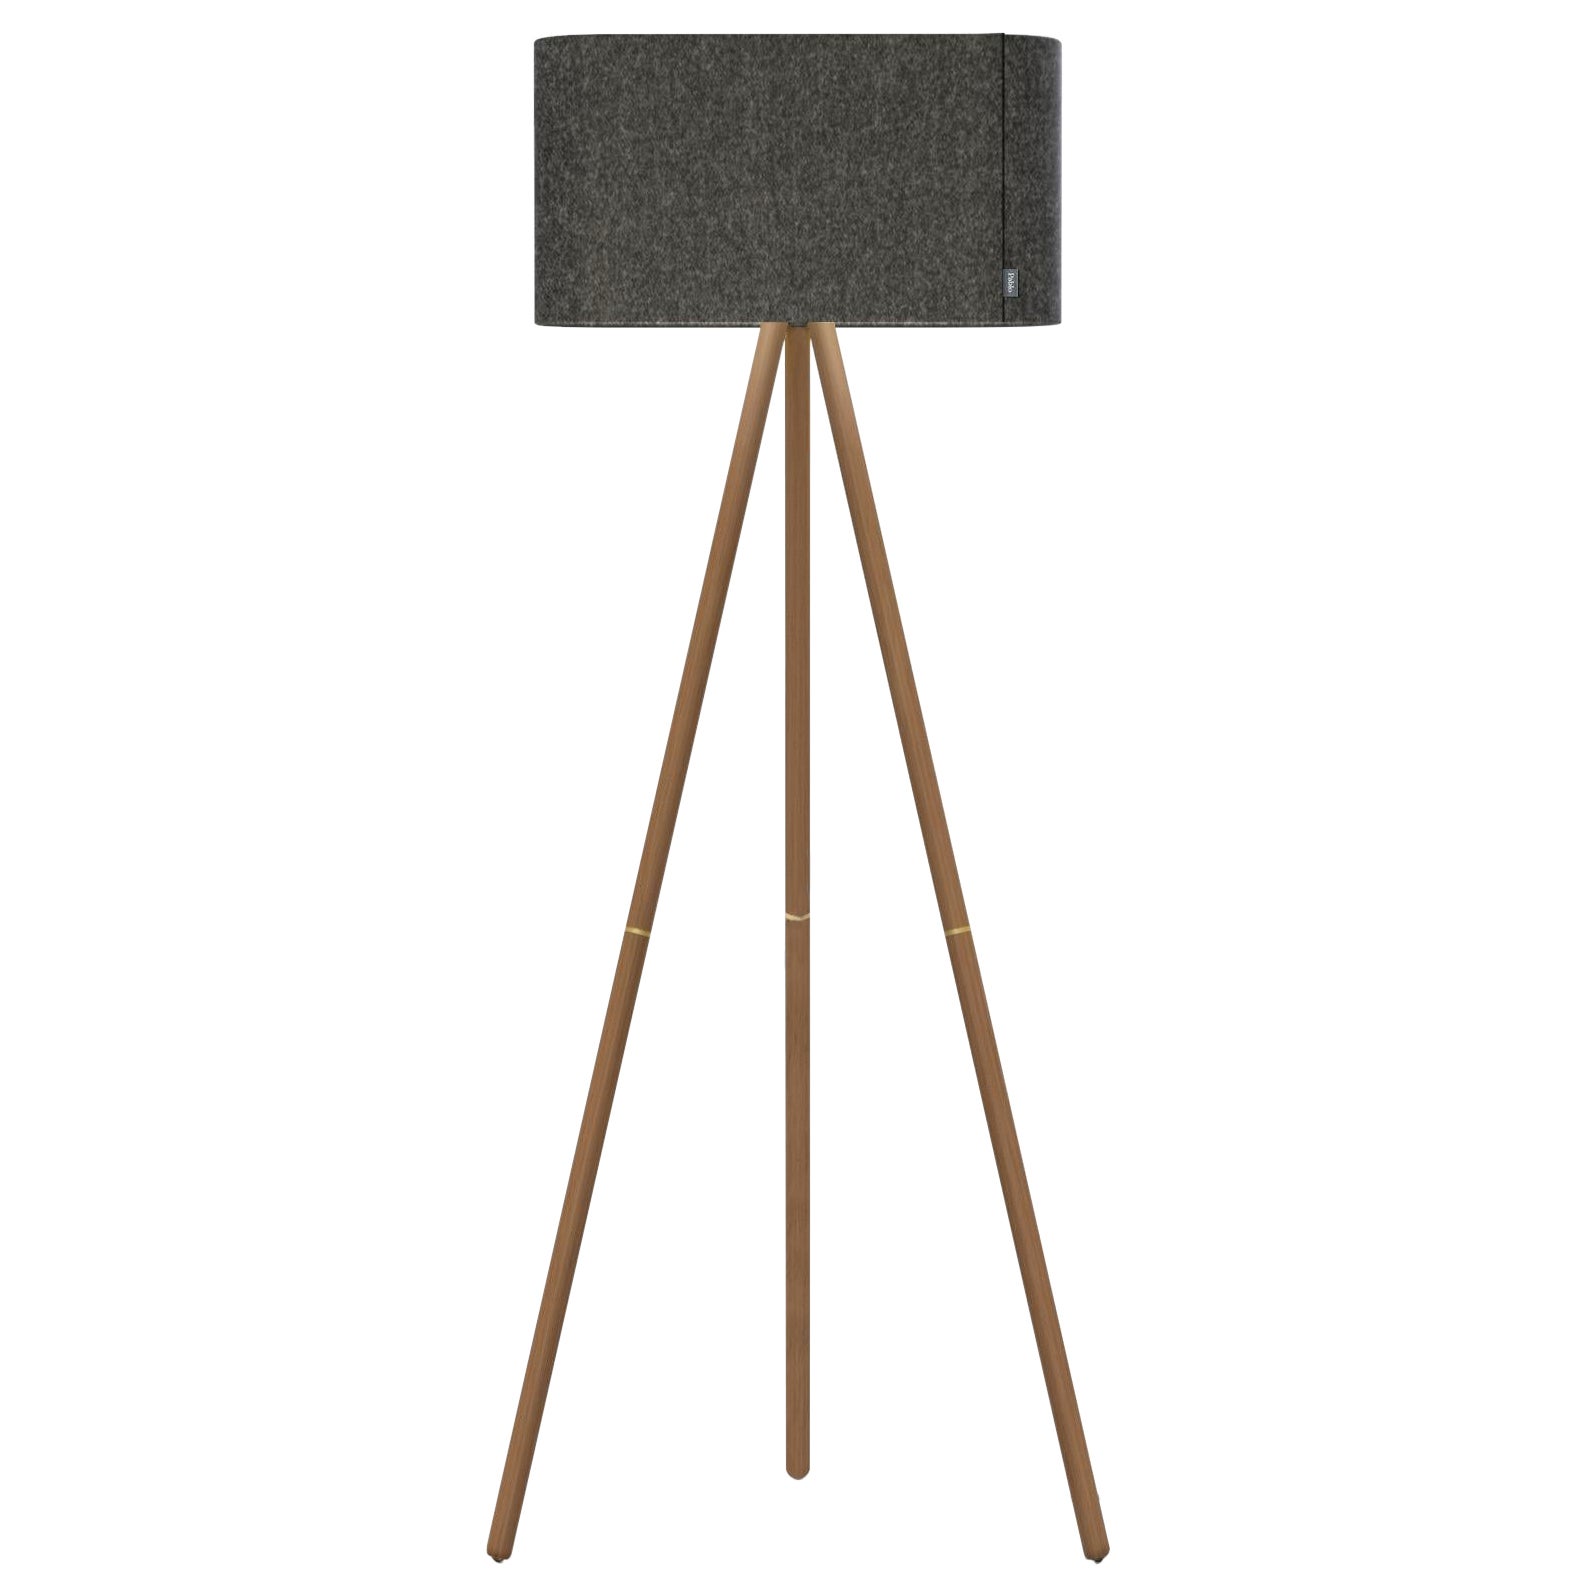 Belmont Floor Lamp in Charcoal with Walnut Legs by Pablo Designs